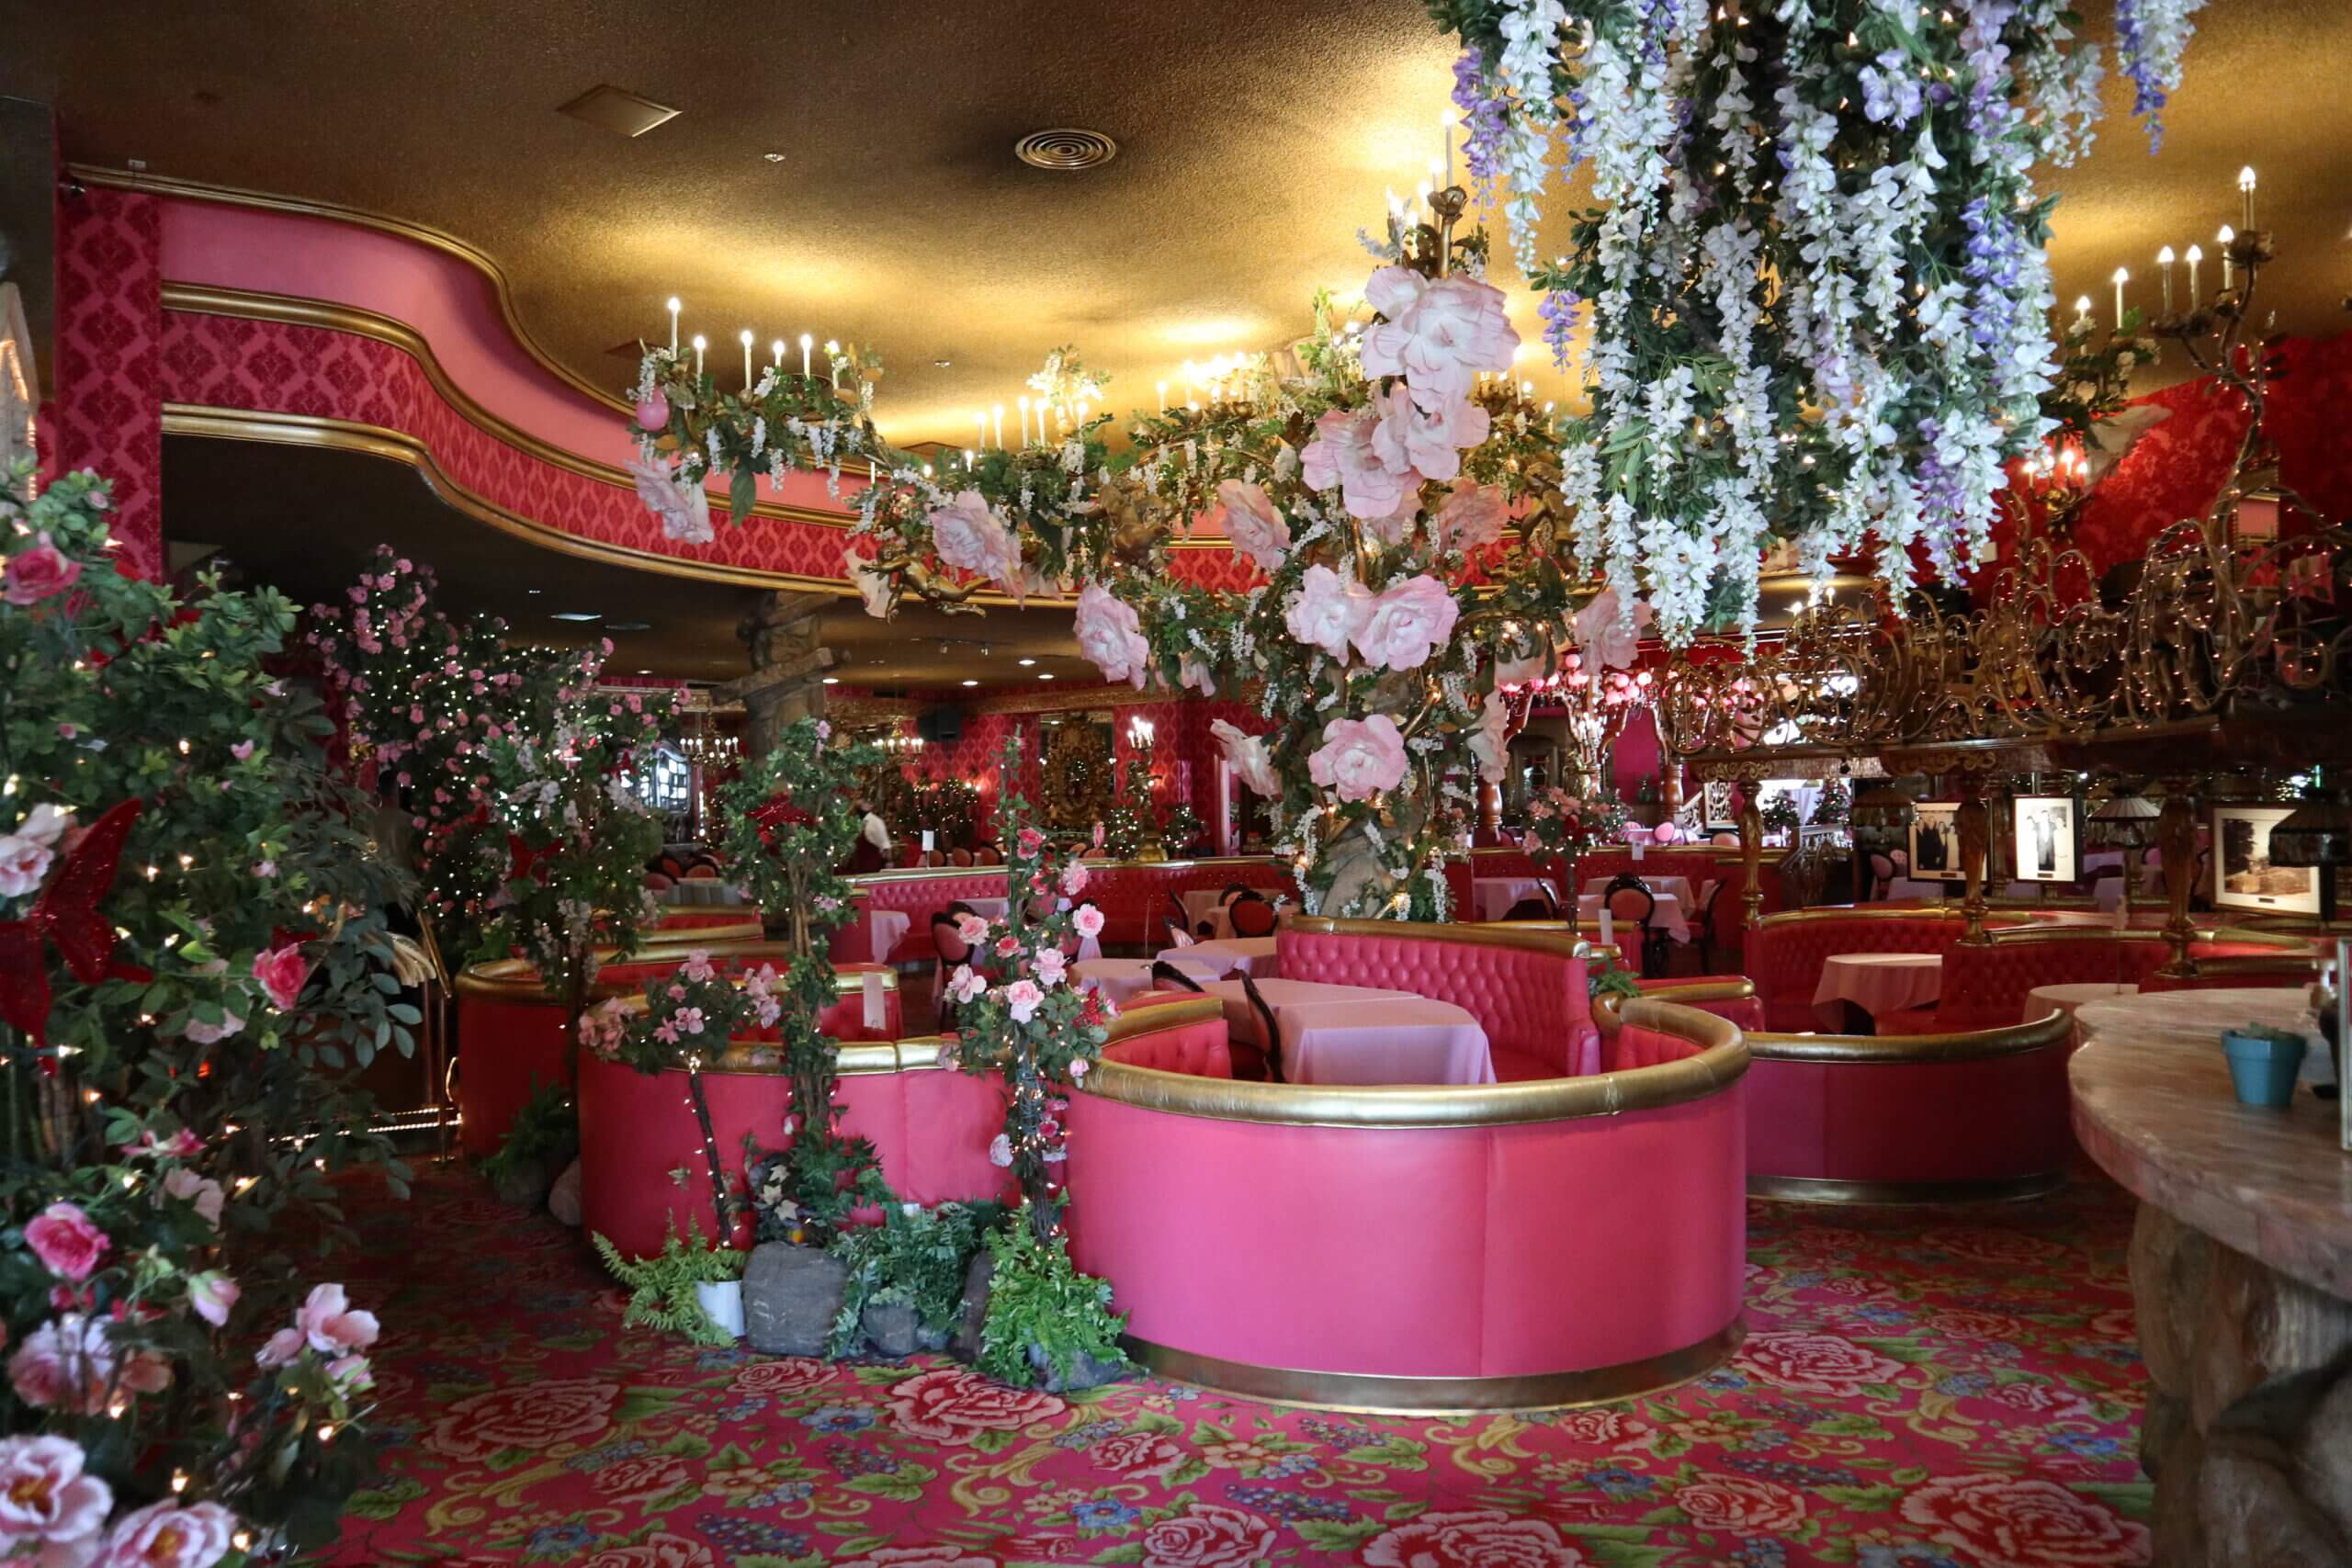 Places to Play: The Madonna Inn